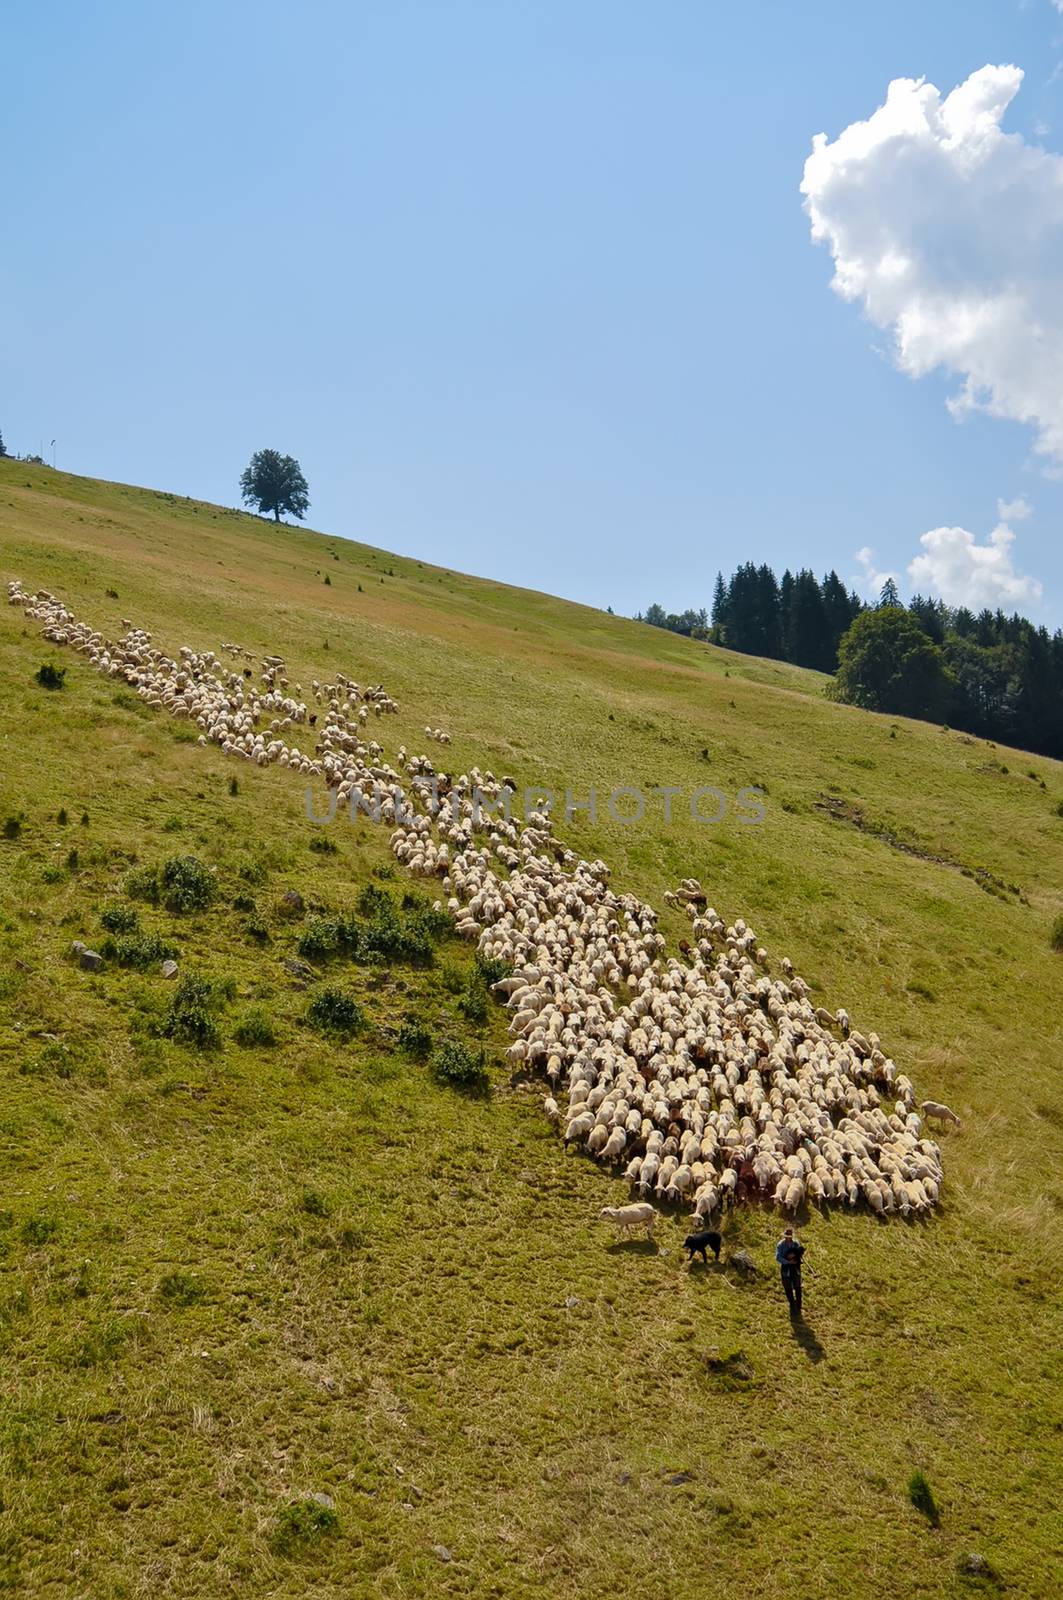 Flock of sheep . by LarisaP